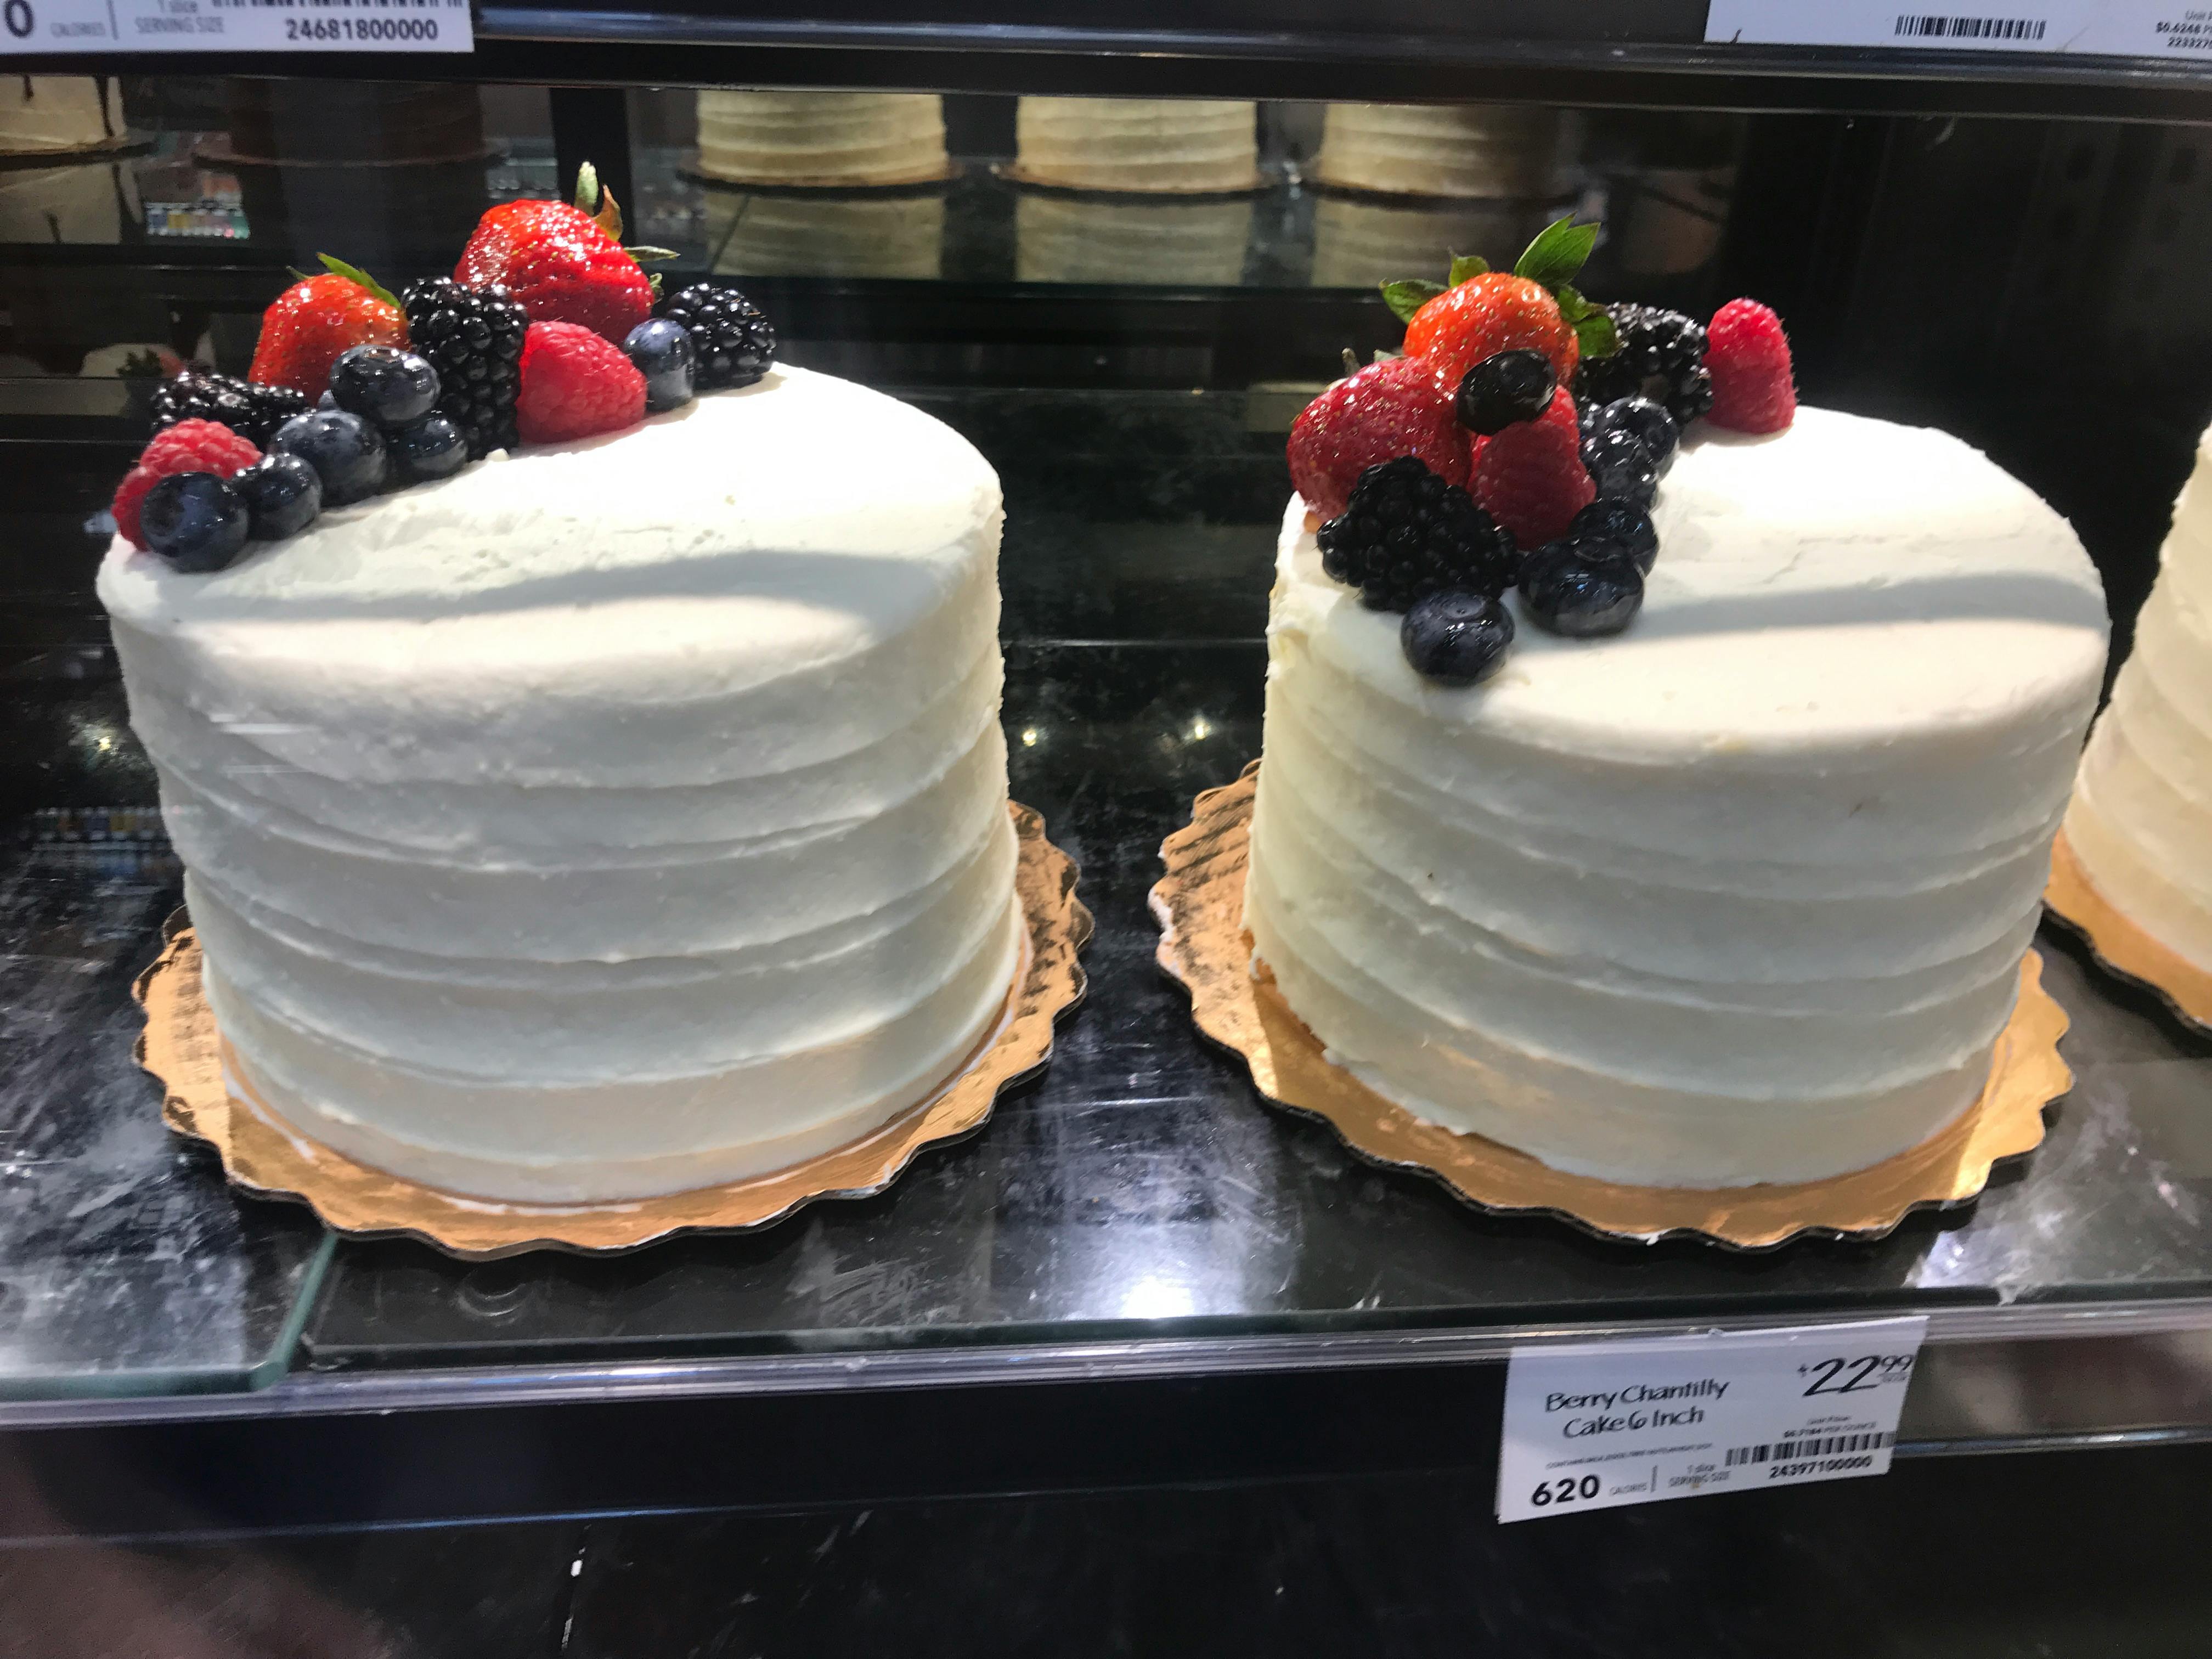 Whole Foods berry chantilly cake in the case.